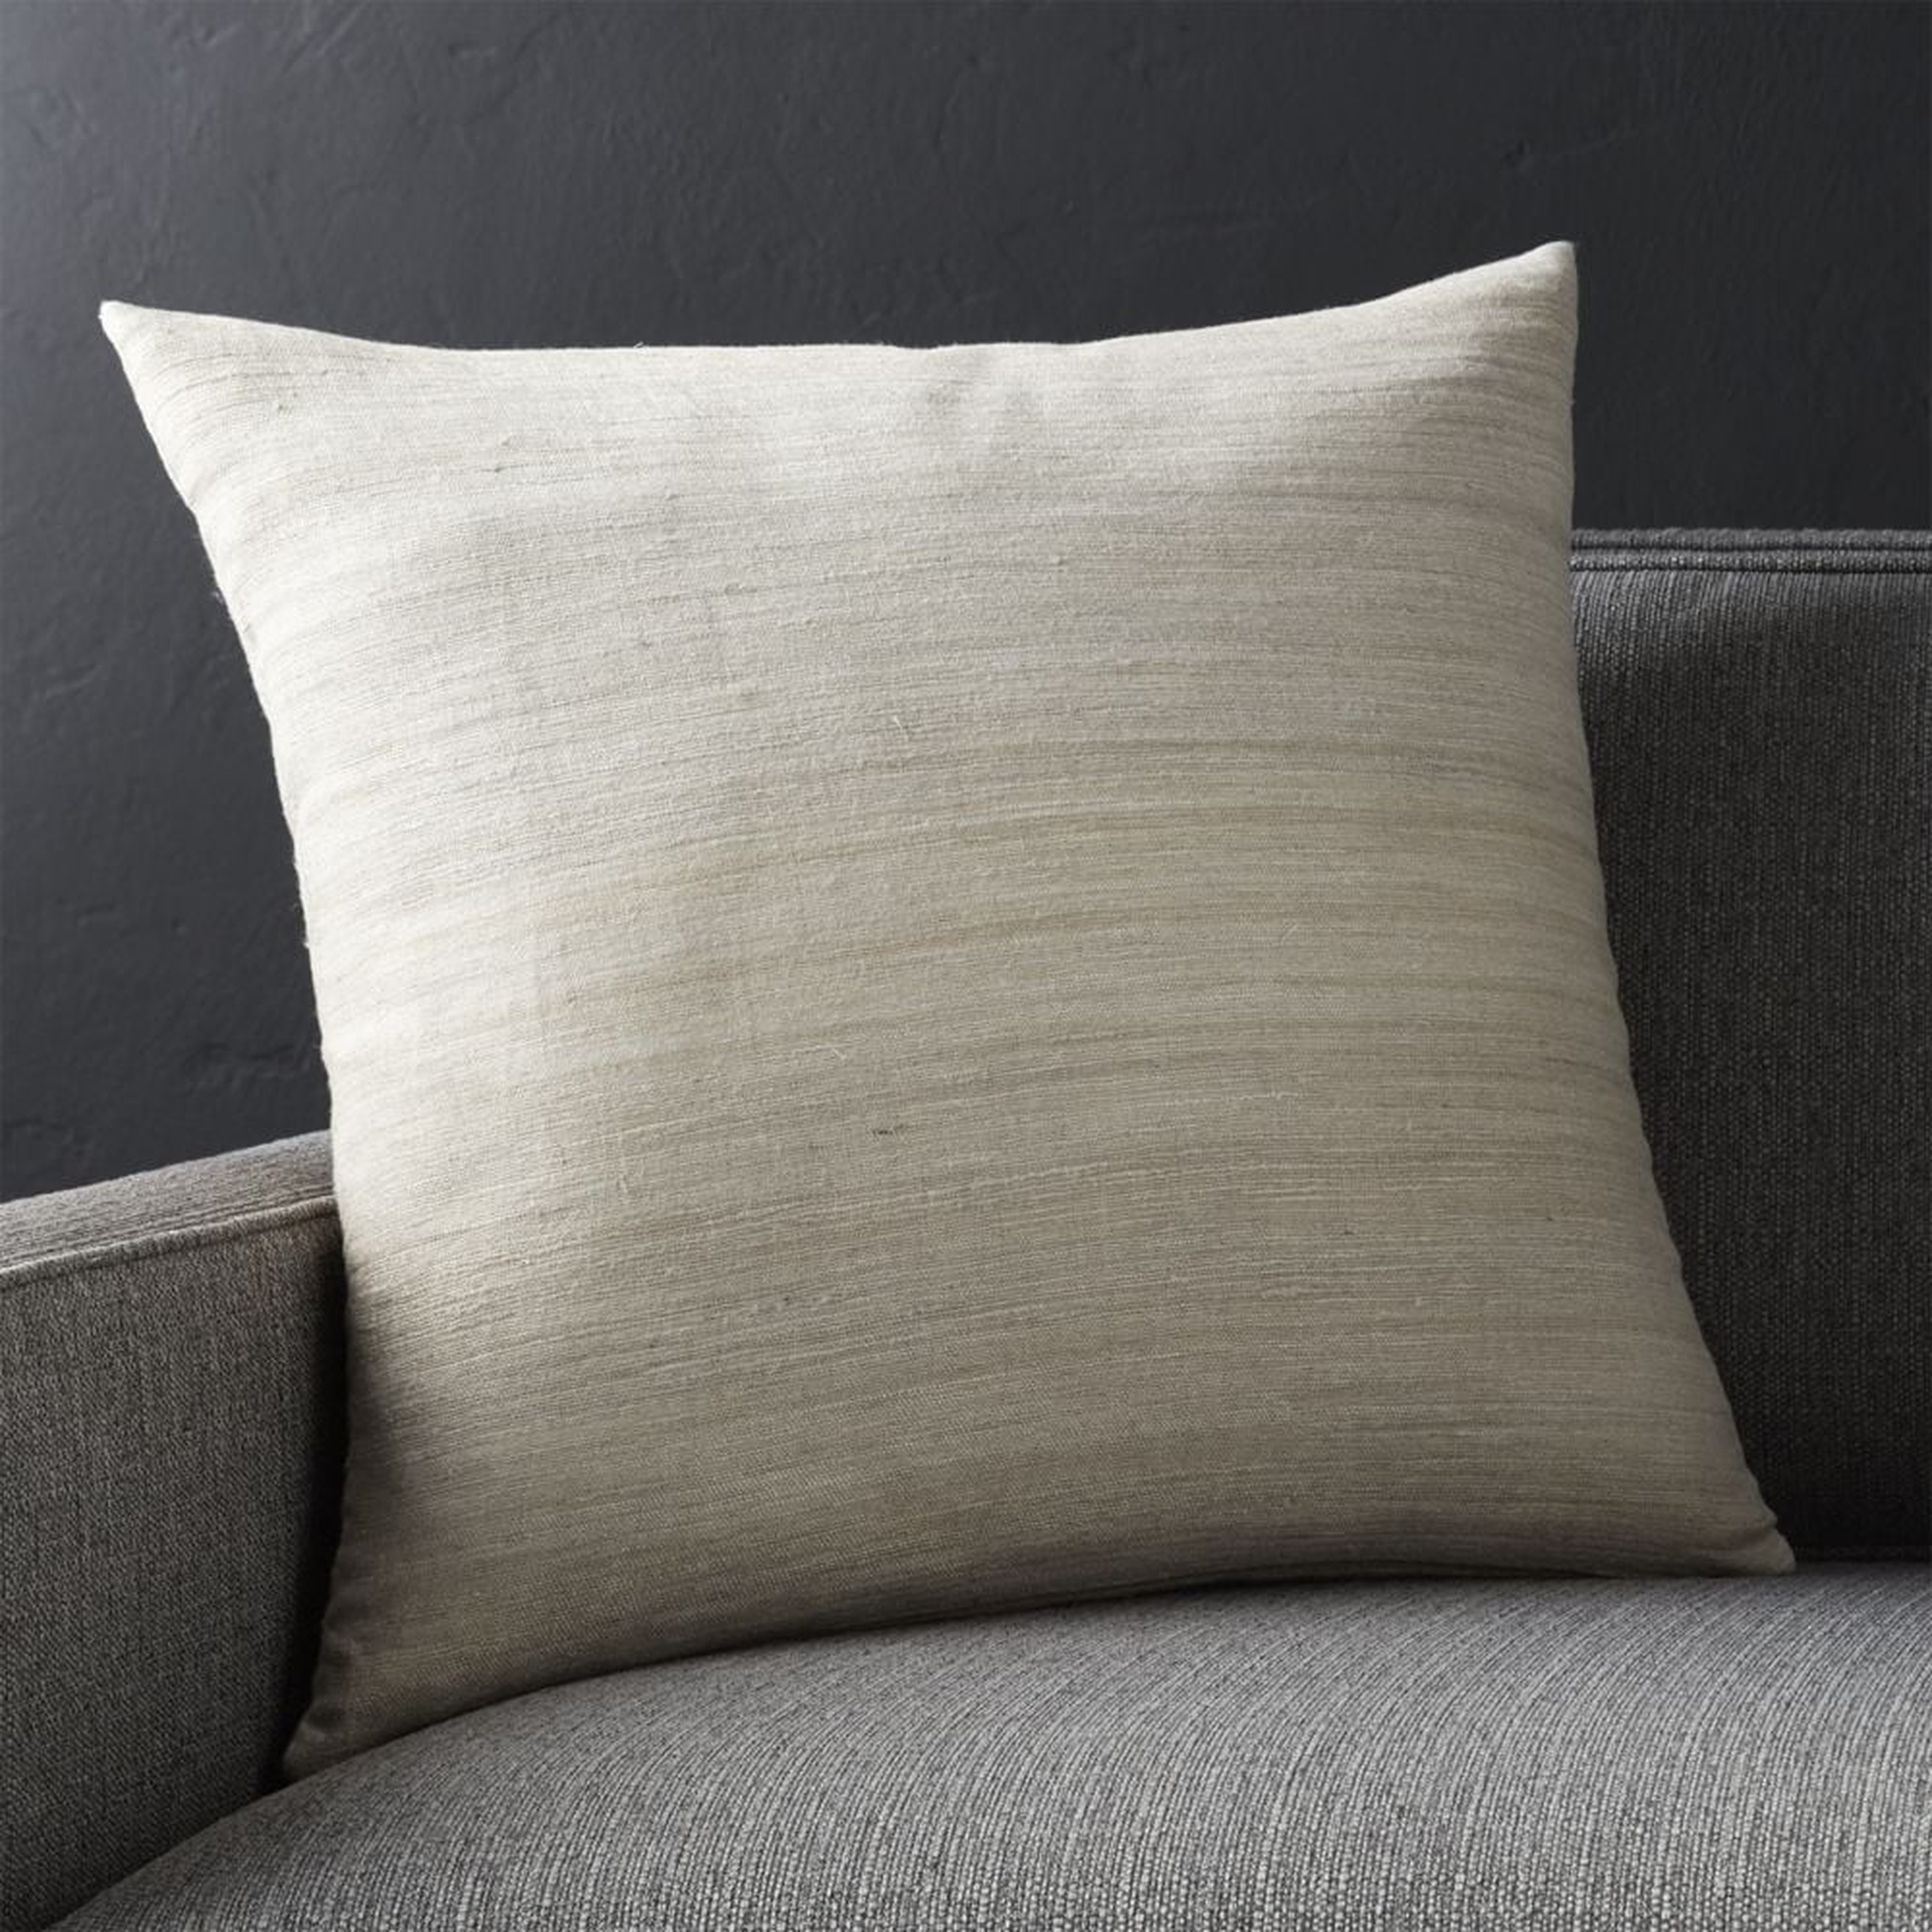 Michaela Sesame 20" Pillow with Feather-Down Insert. - Crate and Barrel